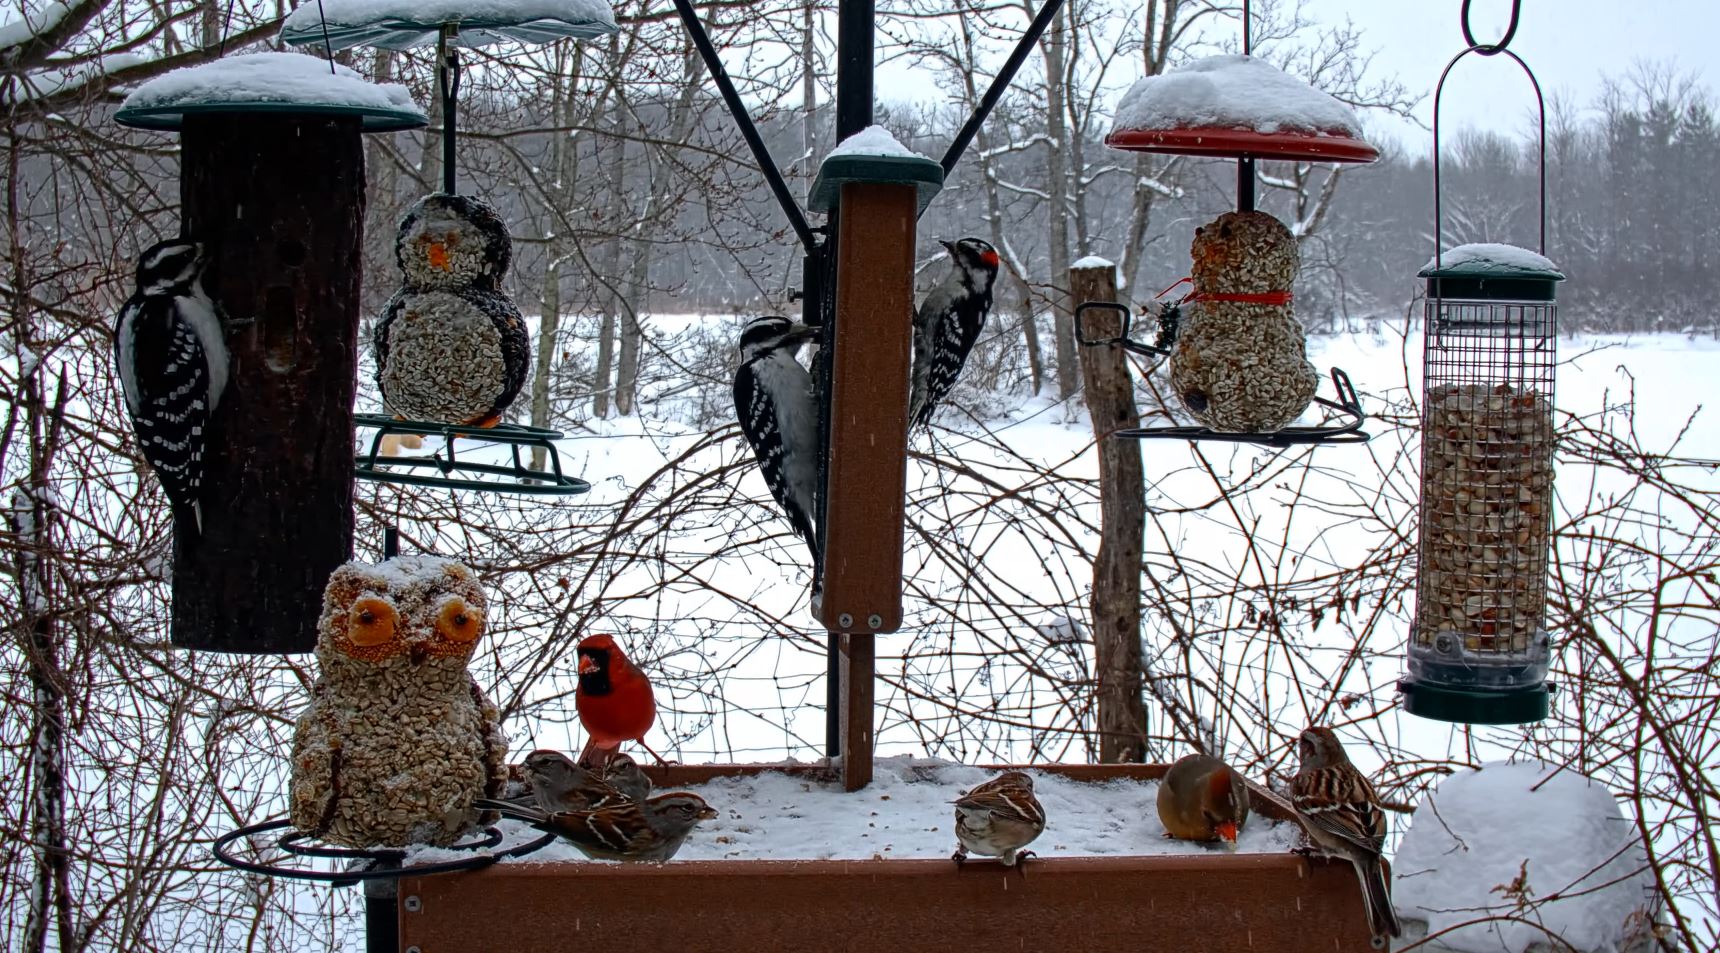 A screenshot of the Cornell FeederWatch cam with light snow. There are many species, including downy woodpecker, hairy woodpecker, male northern cardinal, and several sparrows on the platform.